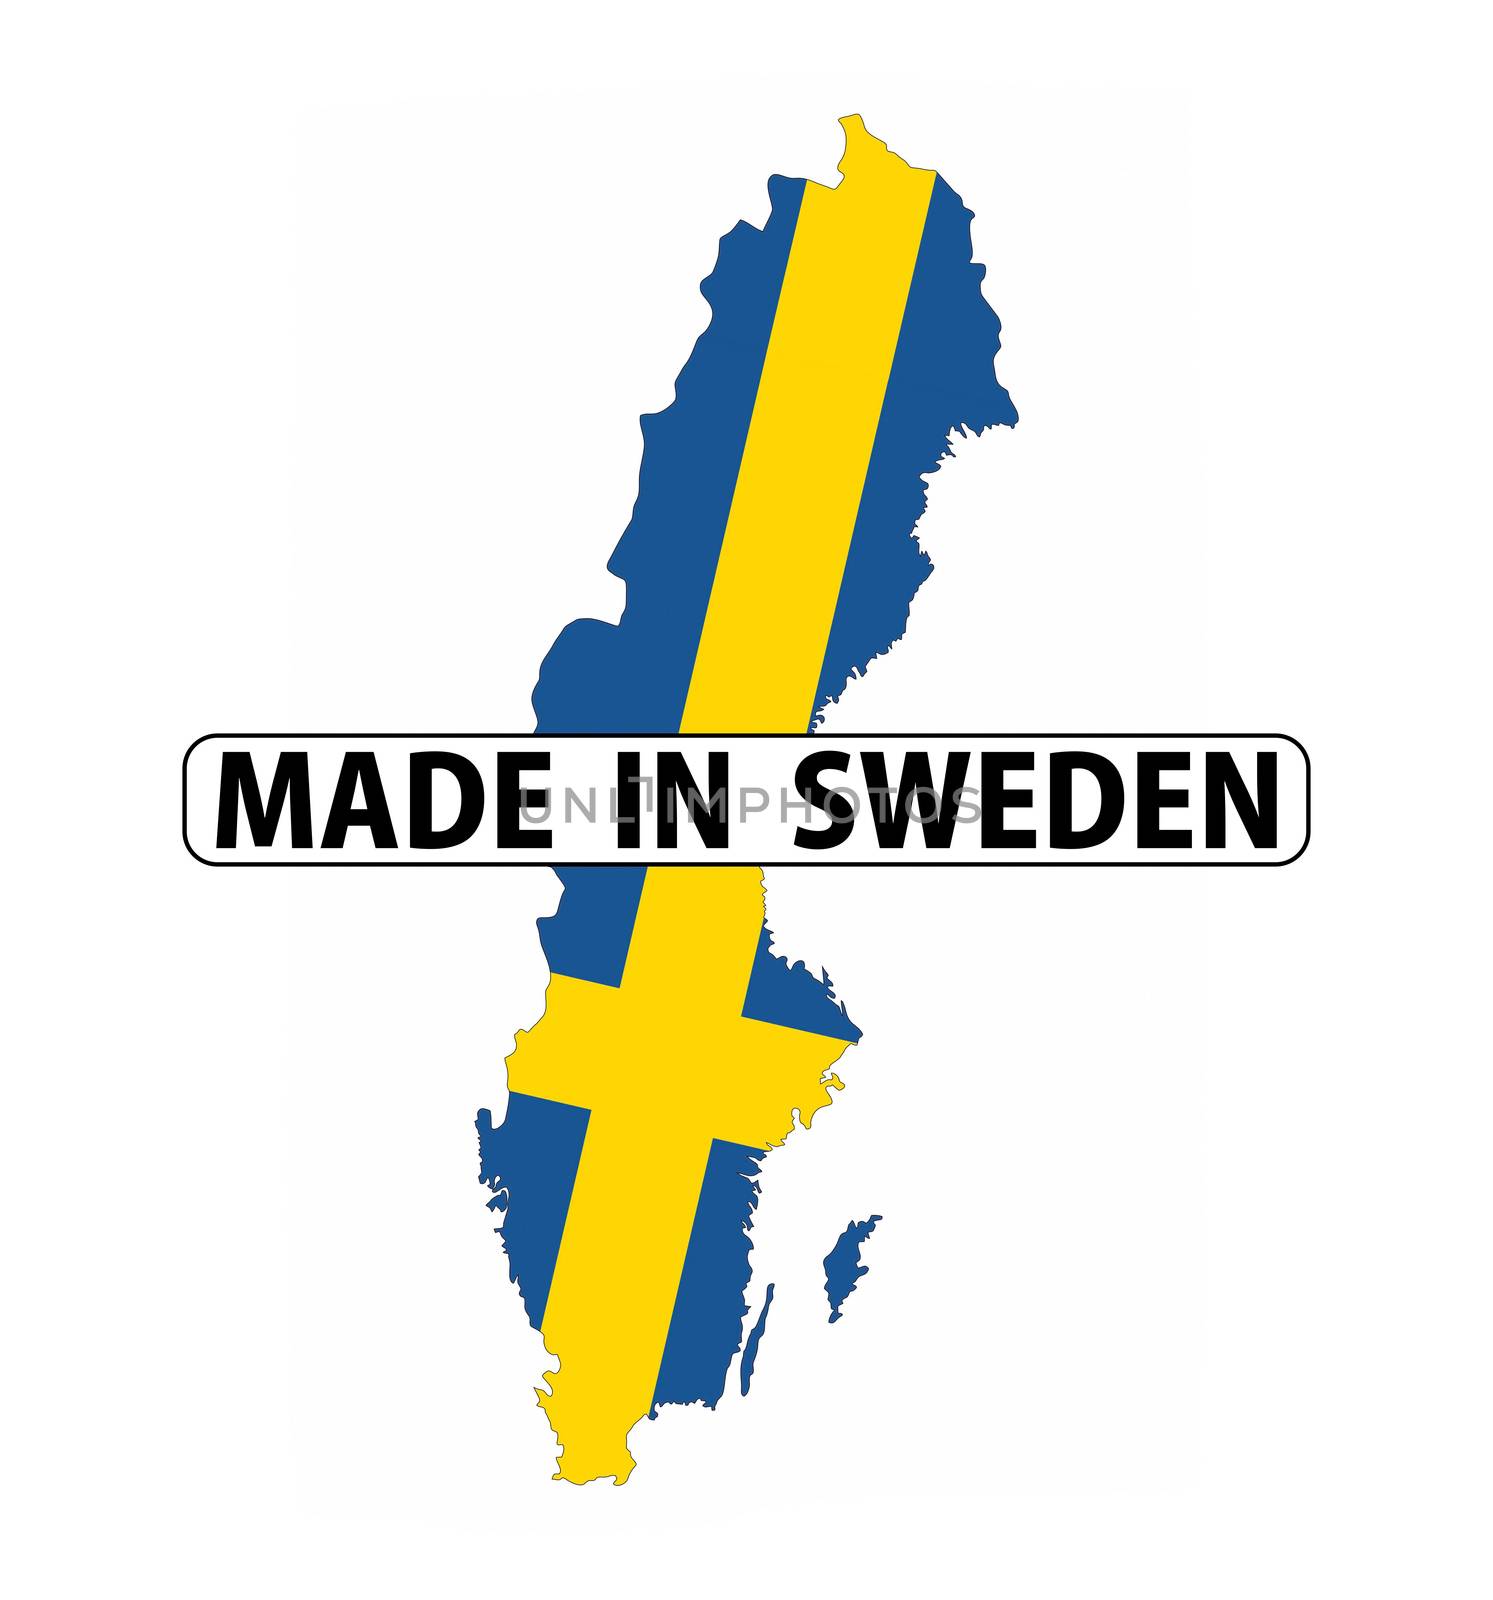 made in sweden by tony4urban